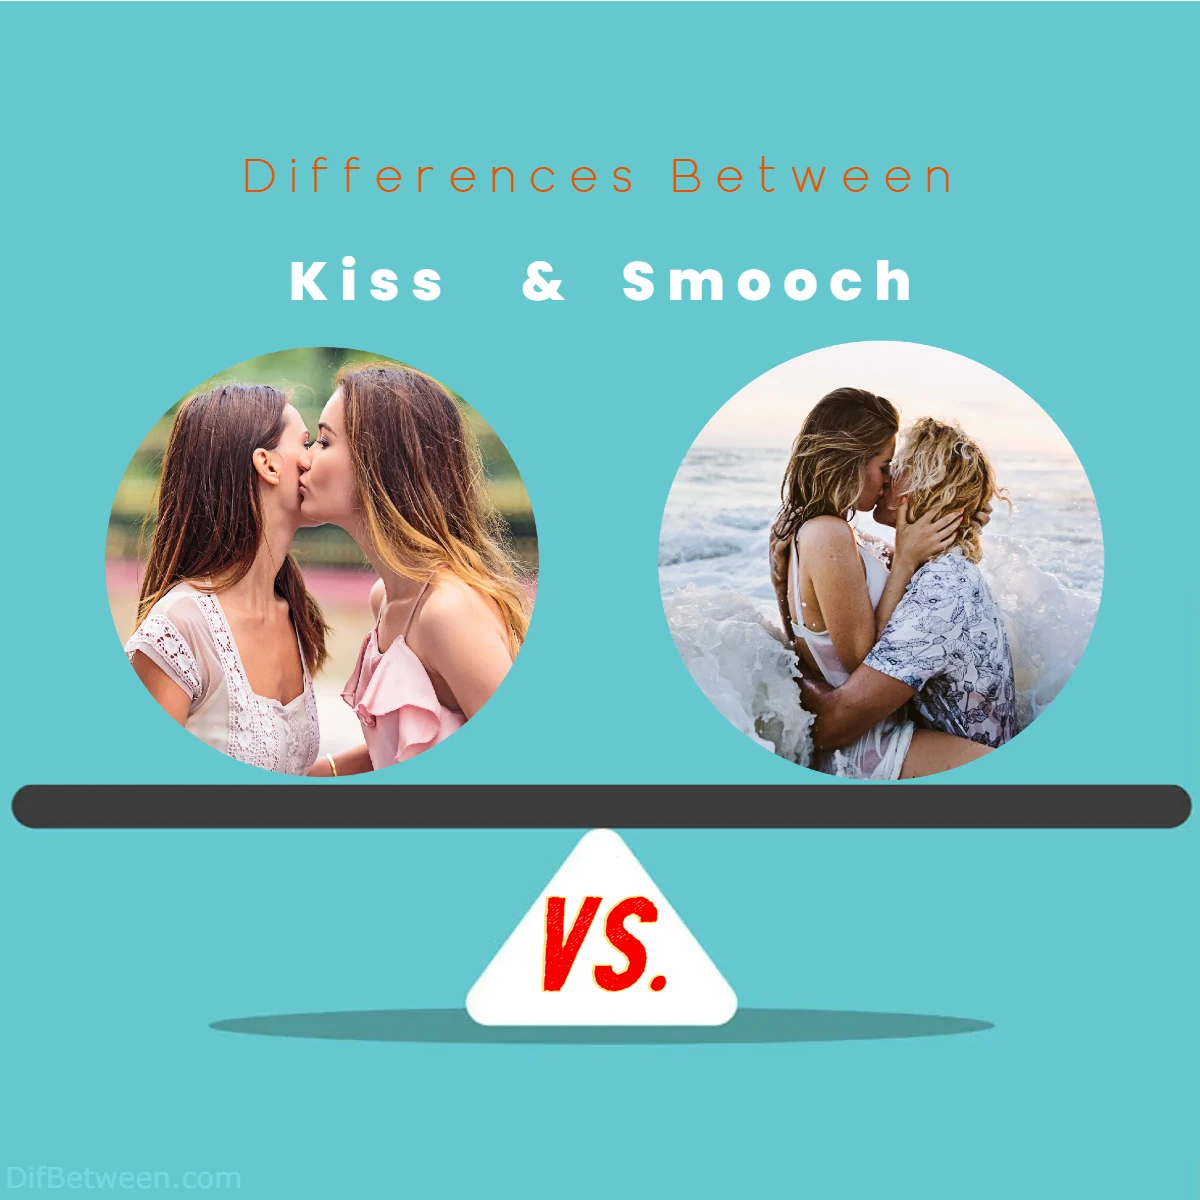 Differences Between Kiss vs Smooch